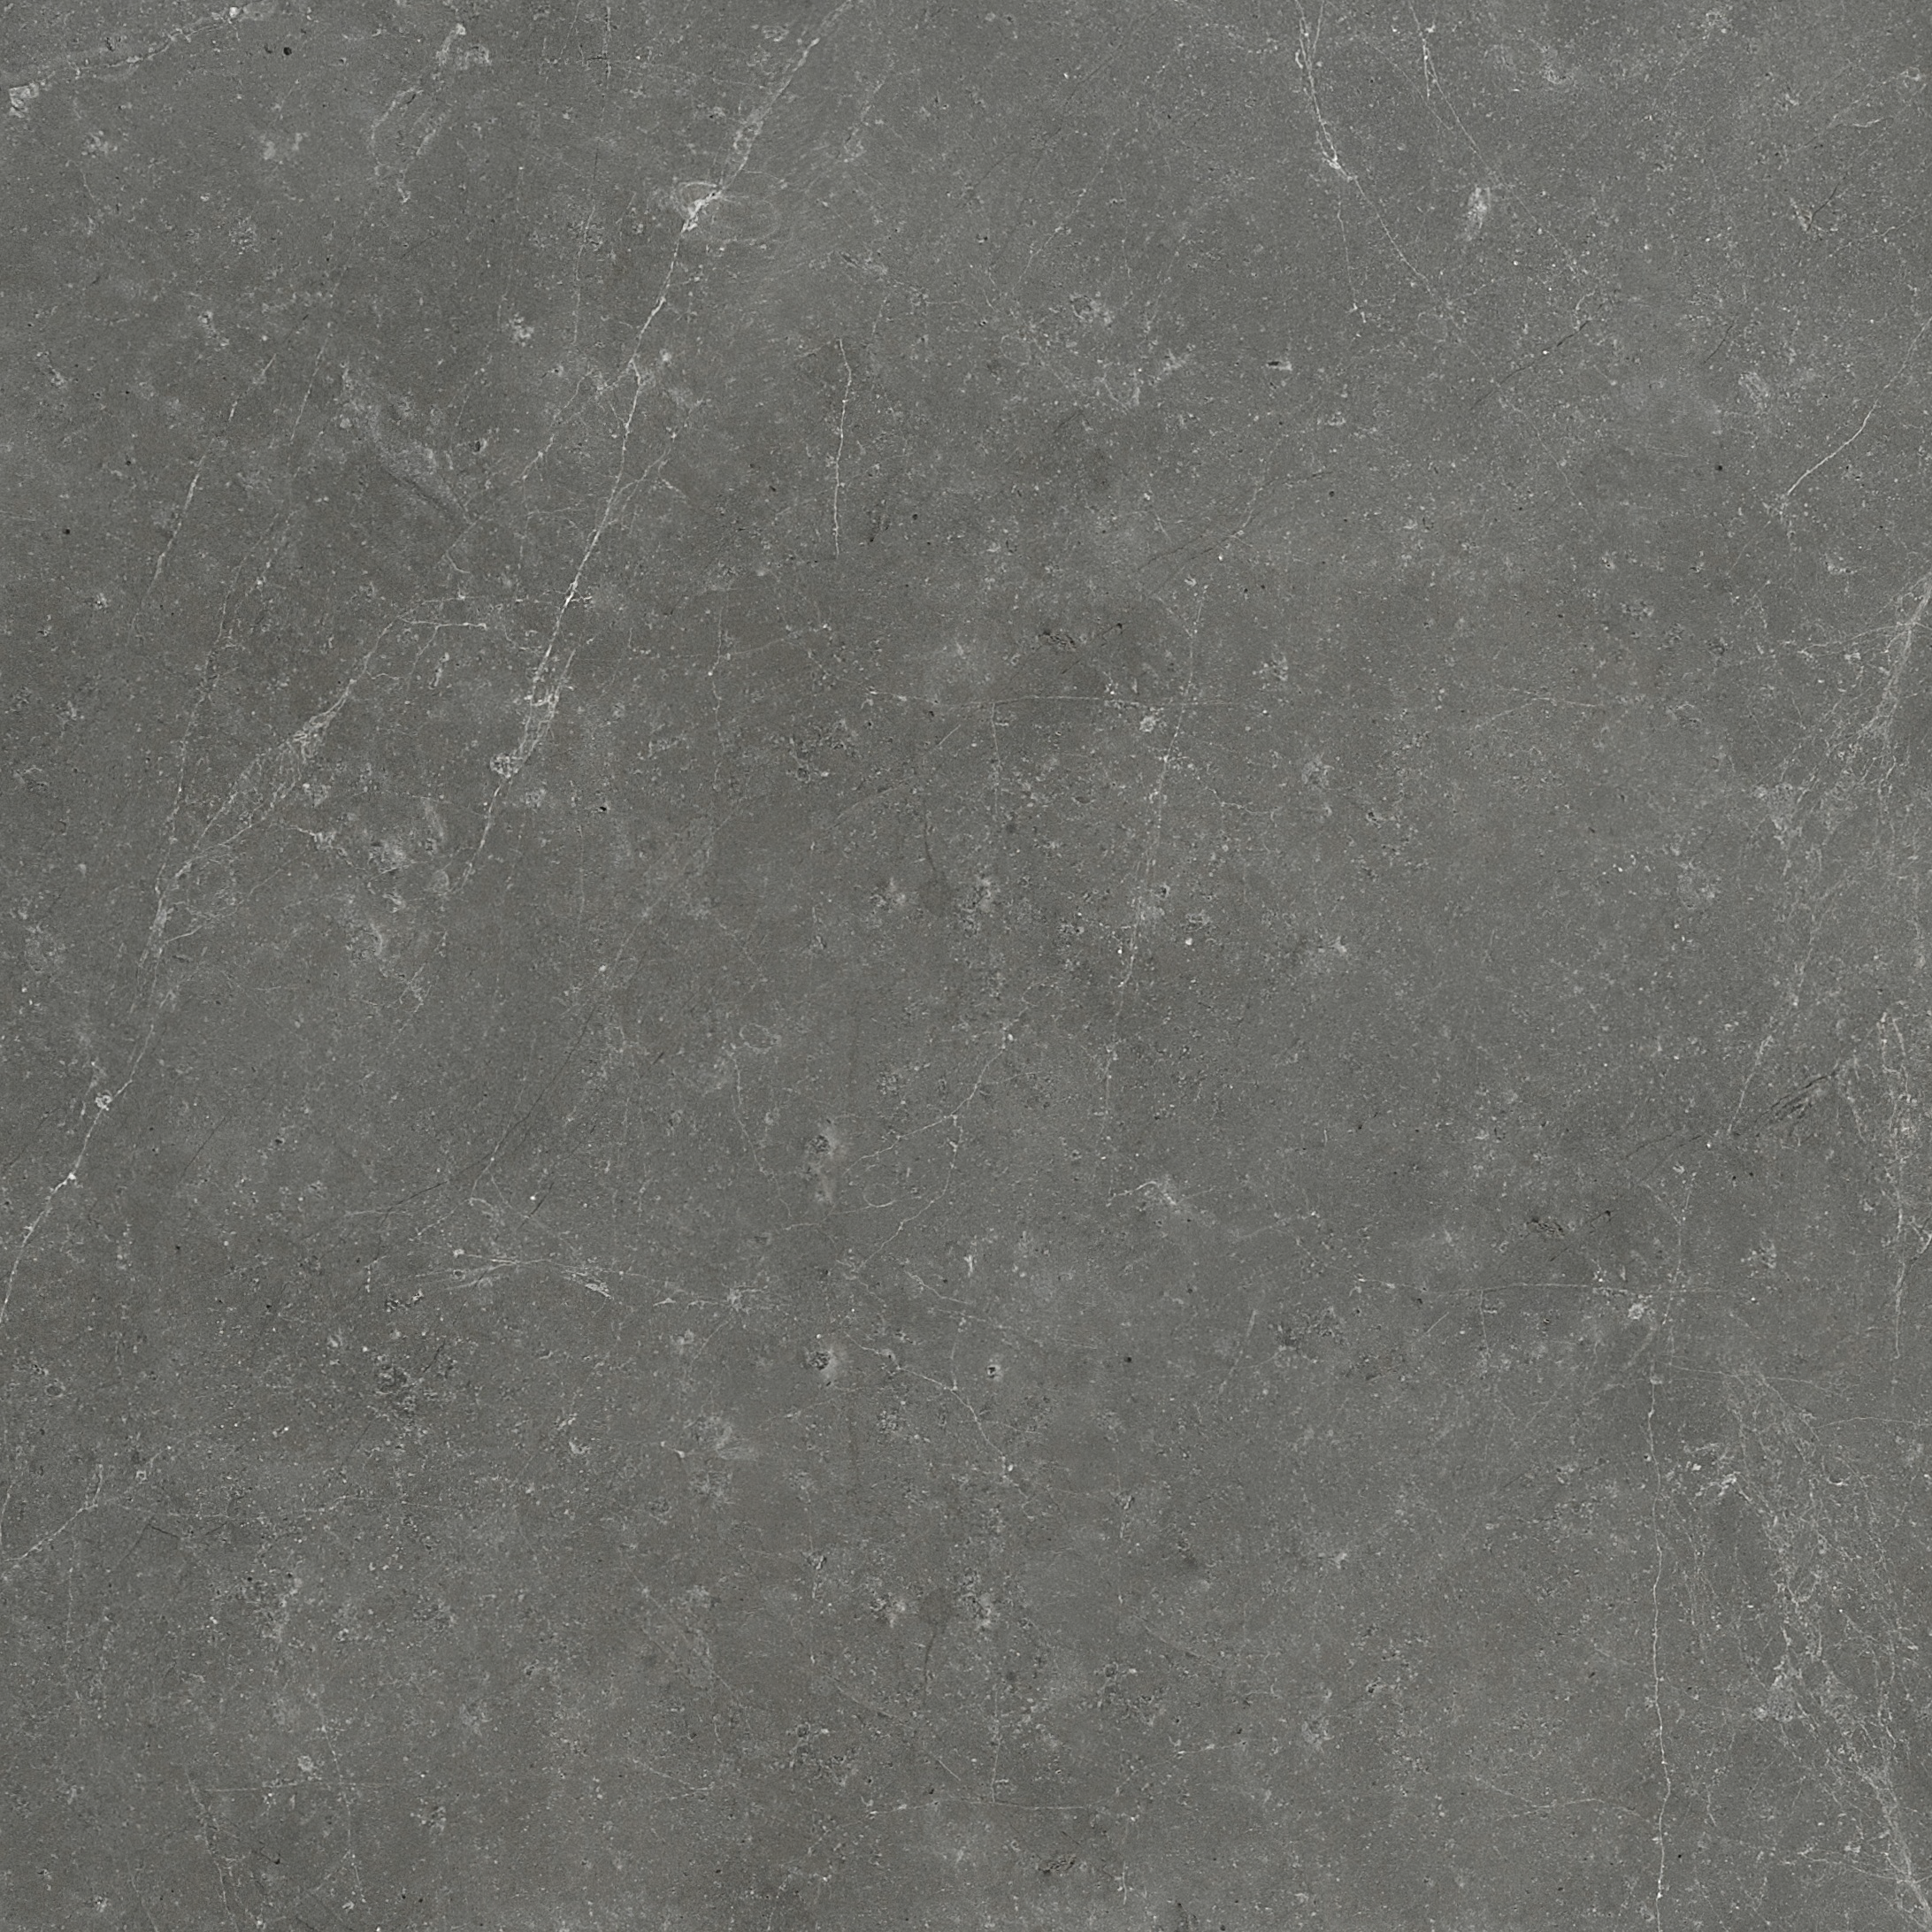 marble pattern natural stone field tile from stark carbon anatolia collection distributed by surface group international polished finish straight edge edge 24x24 square shape